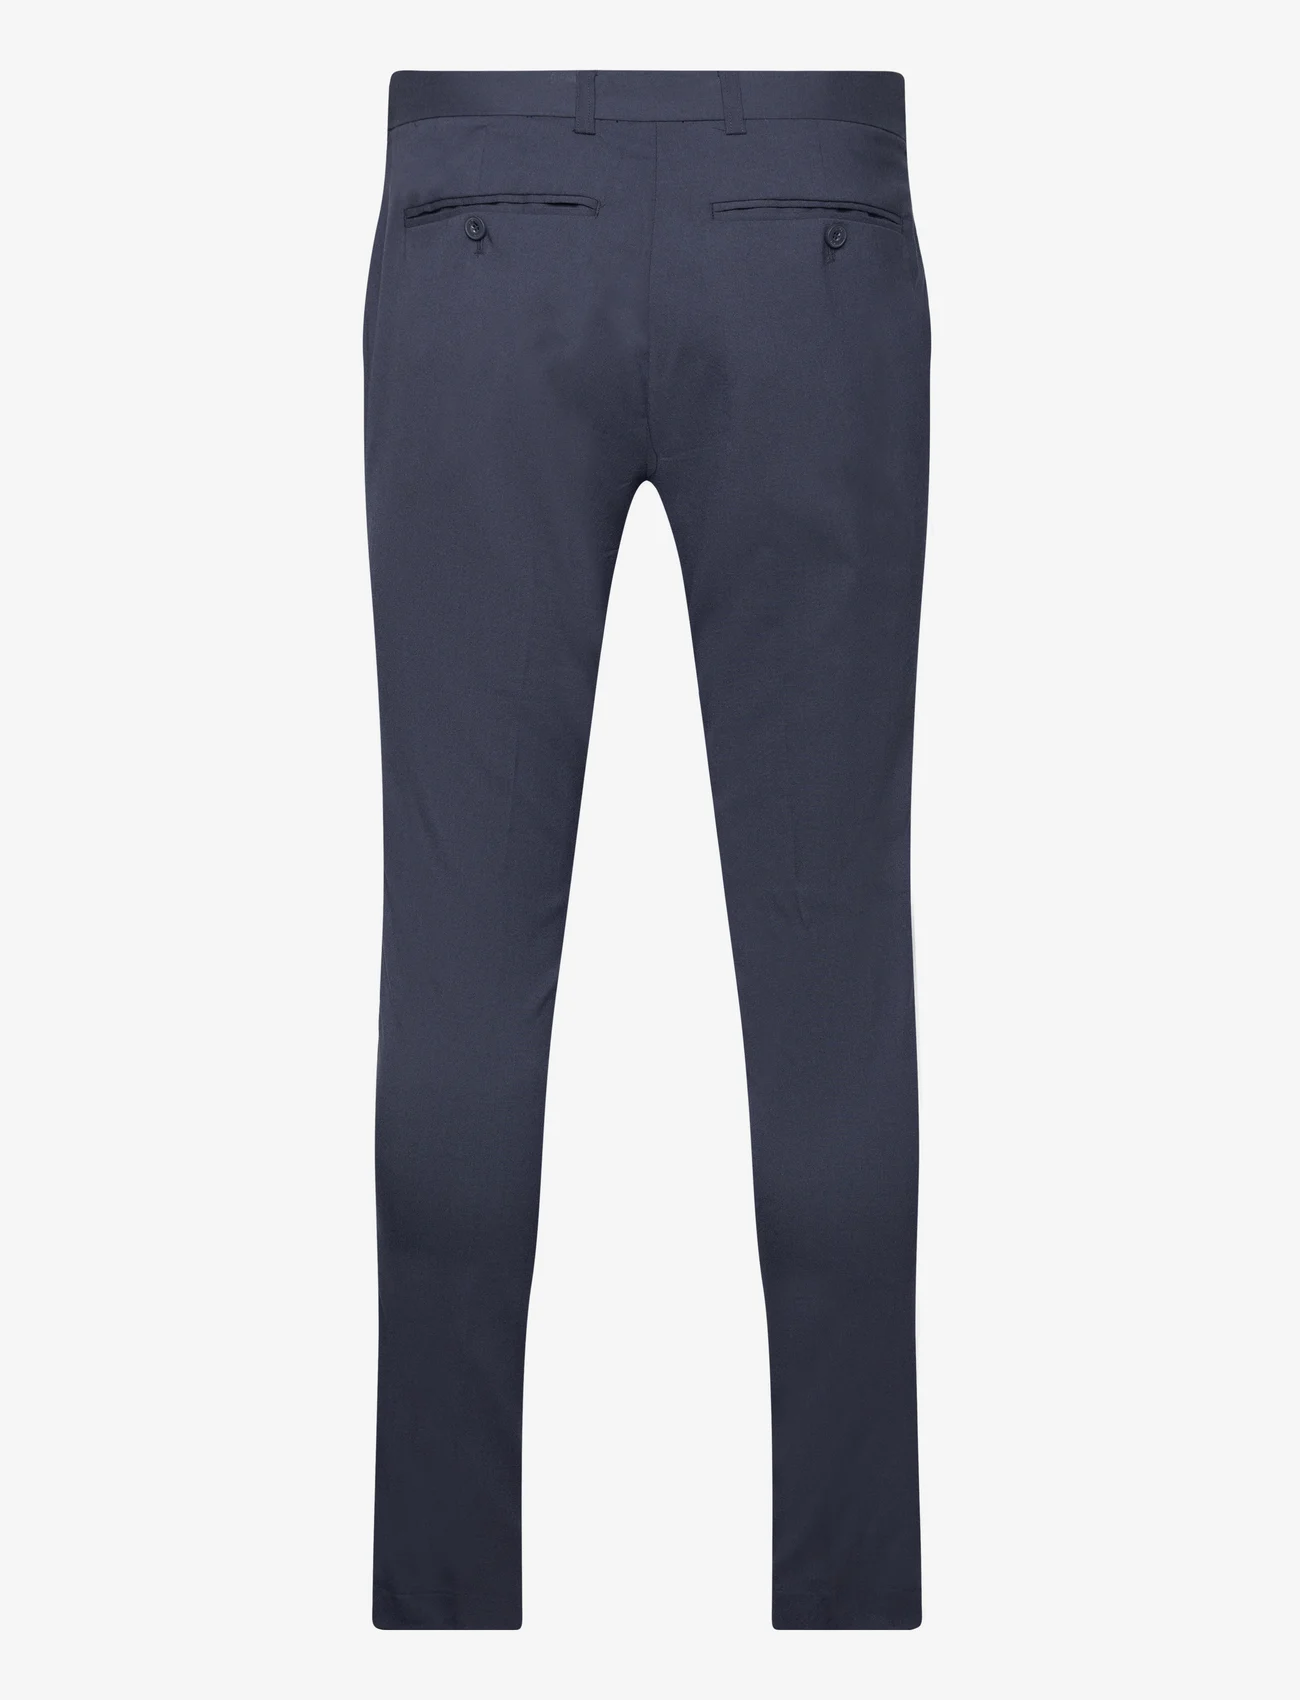 Casual Friday - CFPIHL Suit Pants - suit trousers - navy - 1